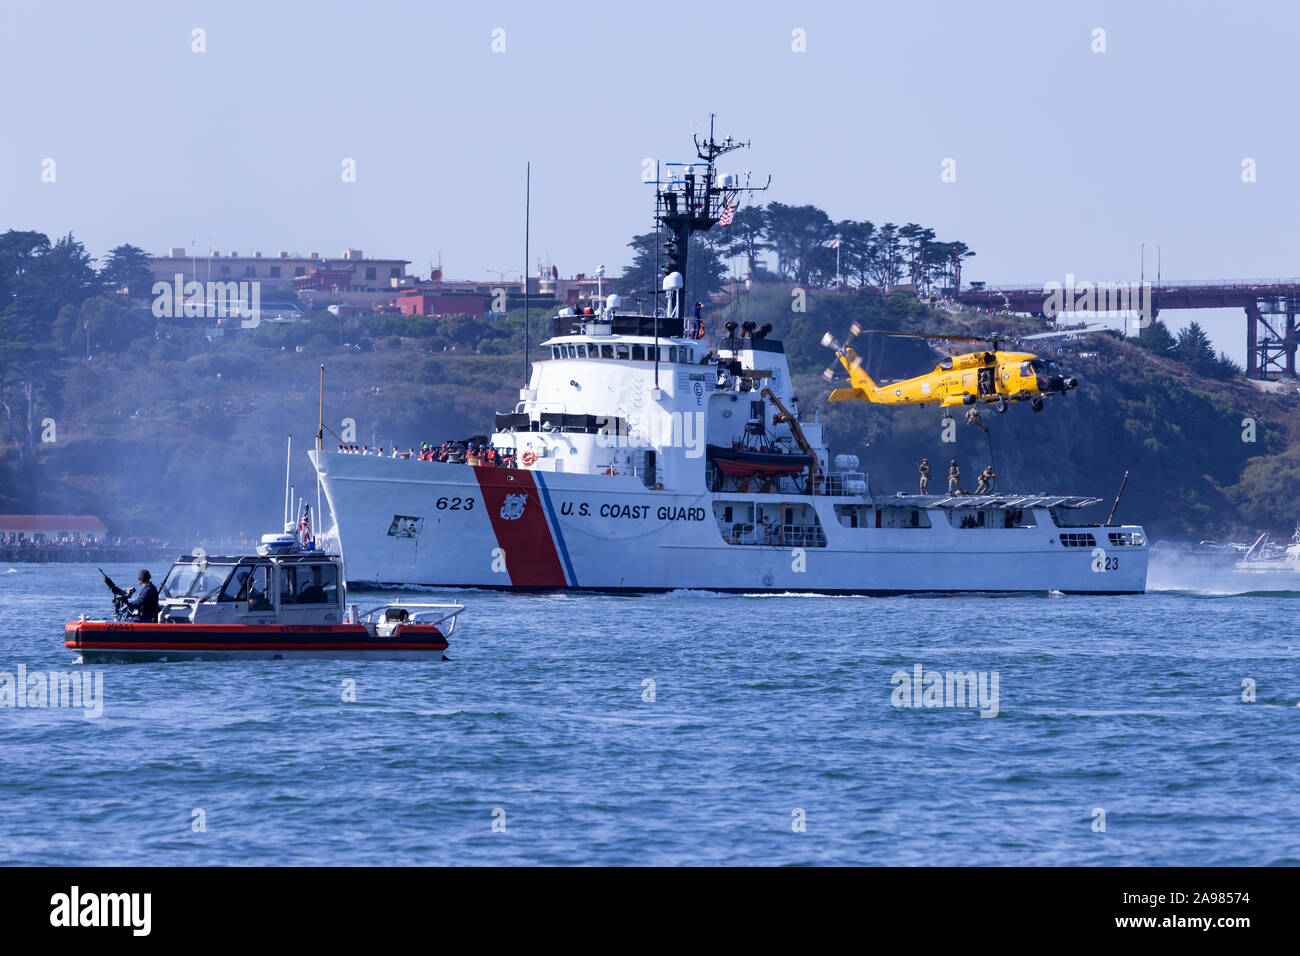 A Coast Guard MSST stands sentry as a United States Coast Guard MH-60 Jayhawk hovers above the Coast Guard Cutter Steadfast (WMEC-623) with forces rep Stock Photo